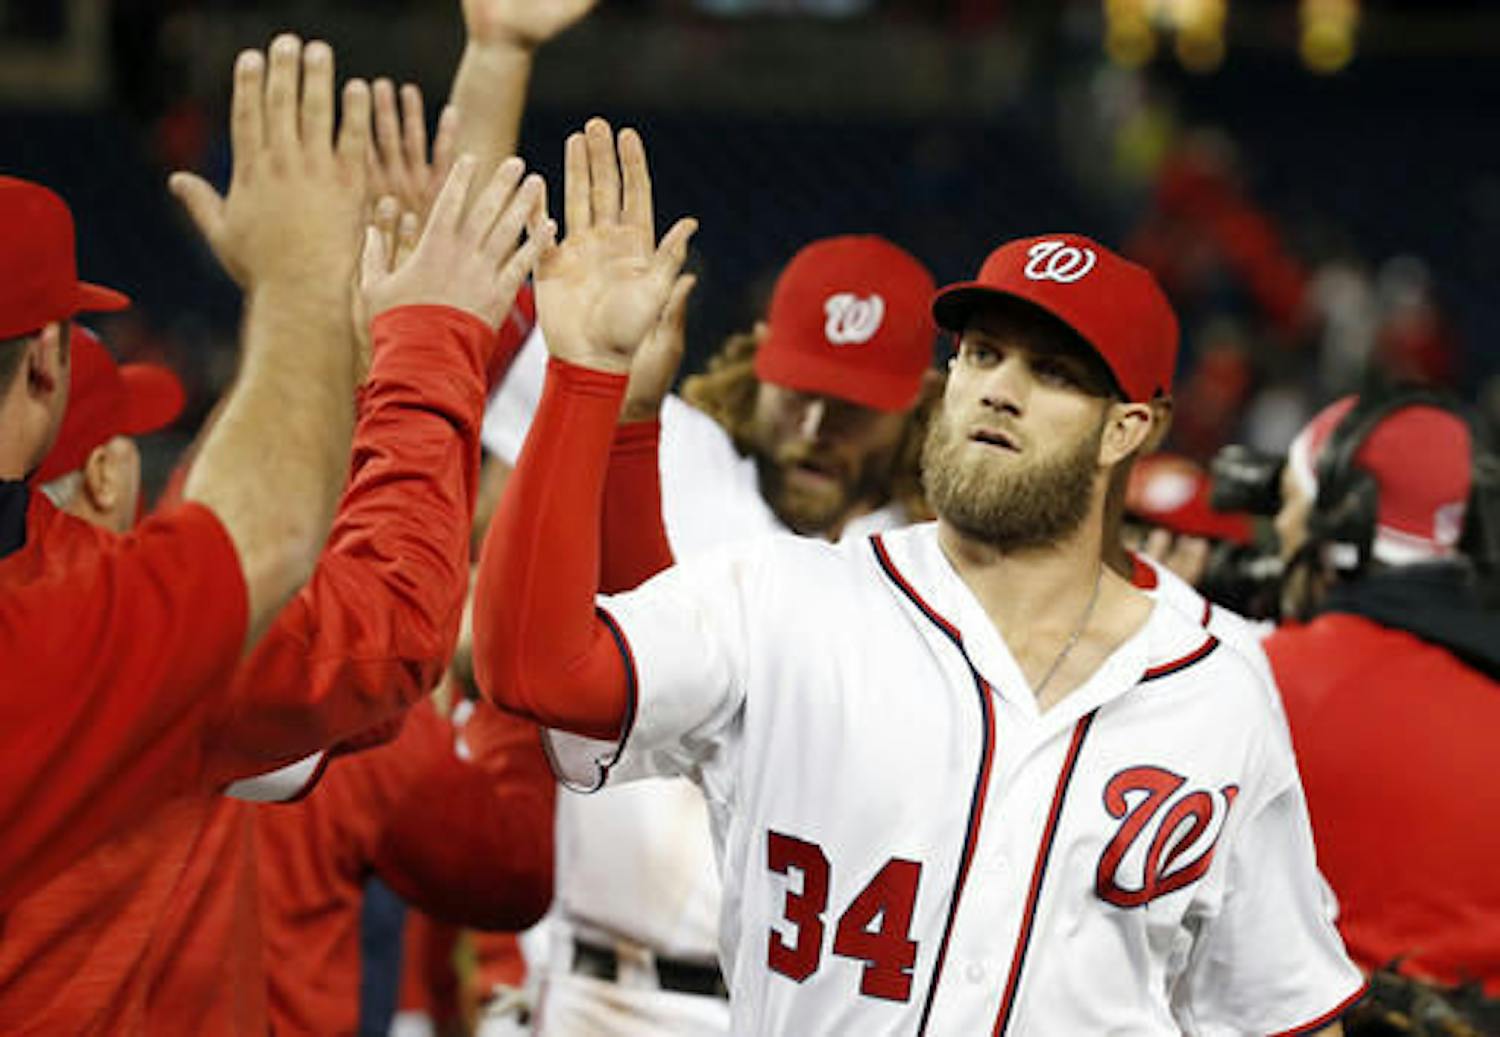 Washington Nationals' Bryce Harper (34) celebrates with teammates after a baseball game against the Atlanta Braves at Nationals Park, Tuesday, April 12, 2016, in Washington. Harper hit a two-run double in the eighth innings. The Nationals won 2-1. (AP Photo/Alex Brandon)